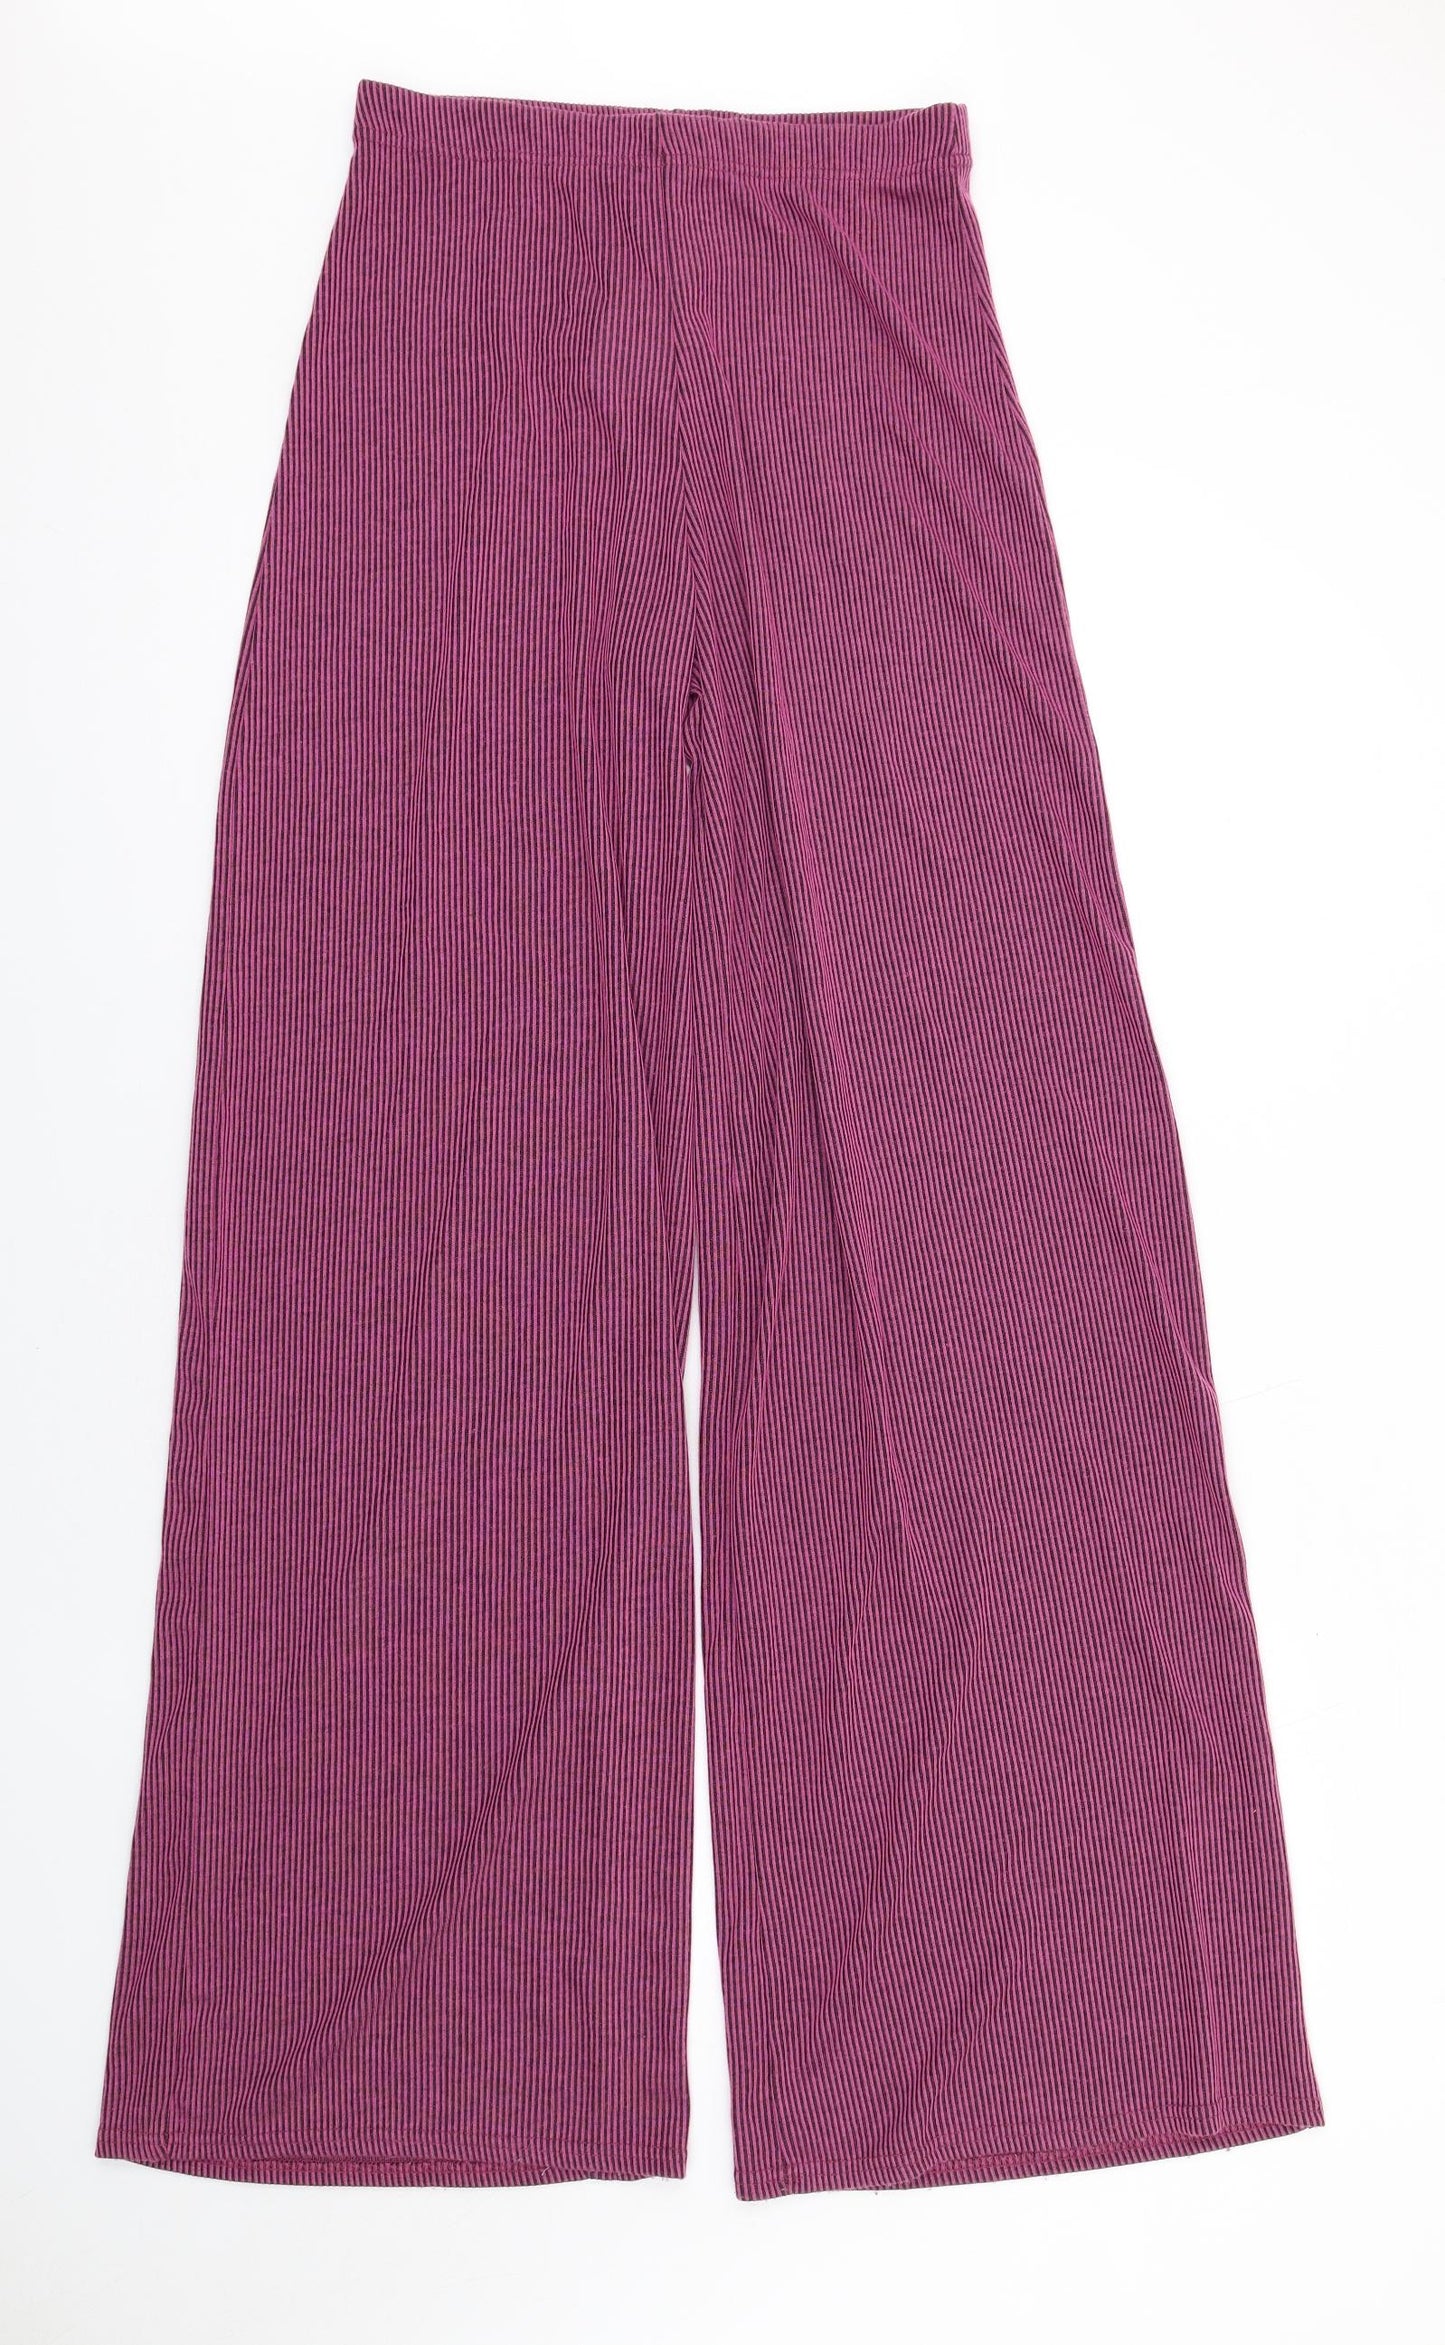 Long Tall Sally Womens Pink Striped Polyester Trousers Size 10 L35 in Regular